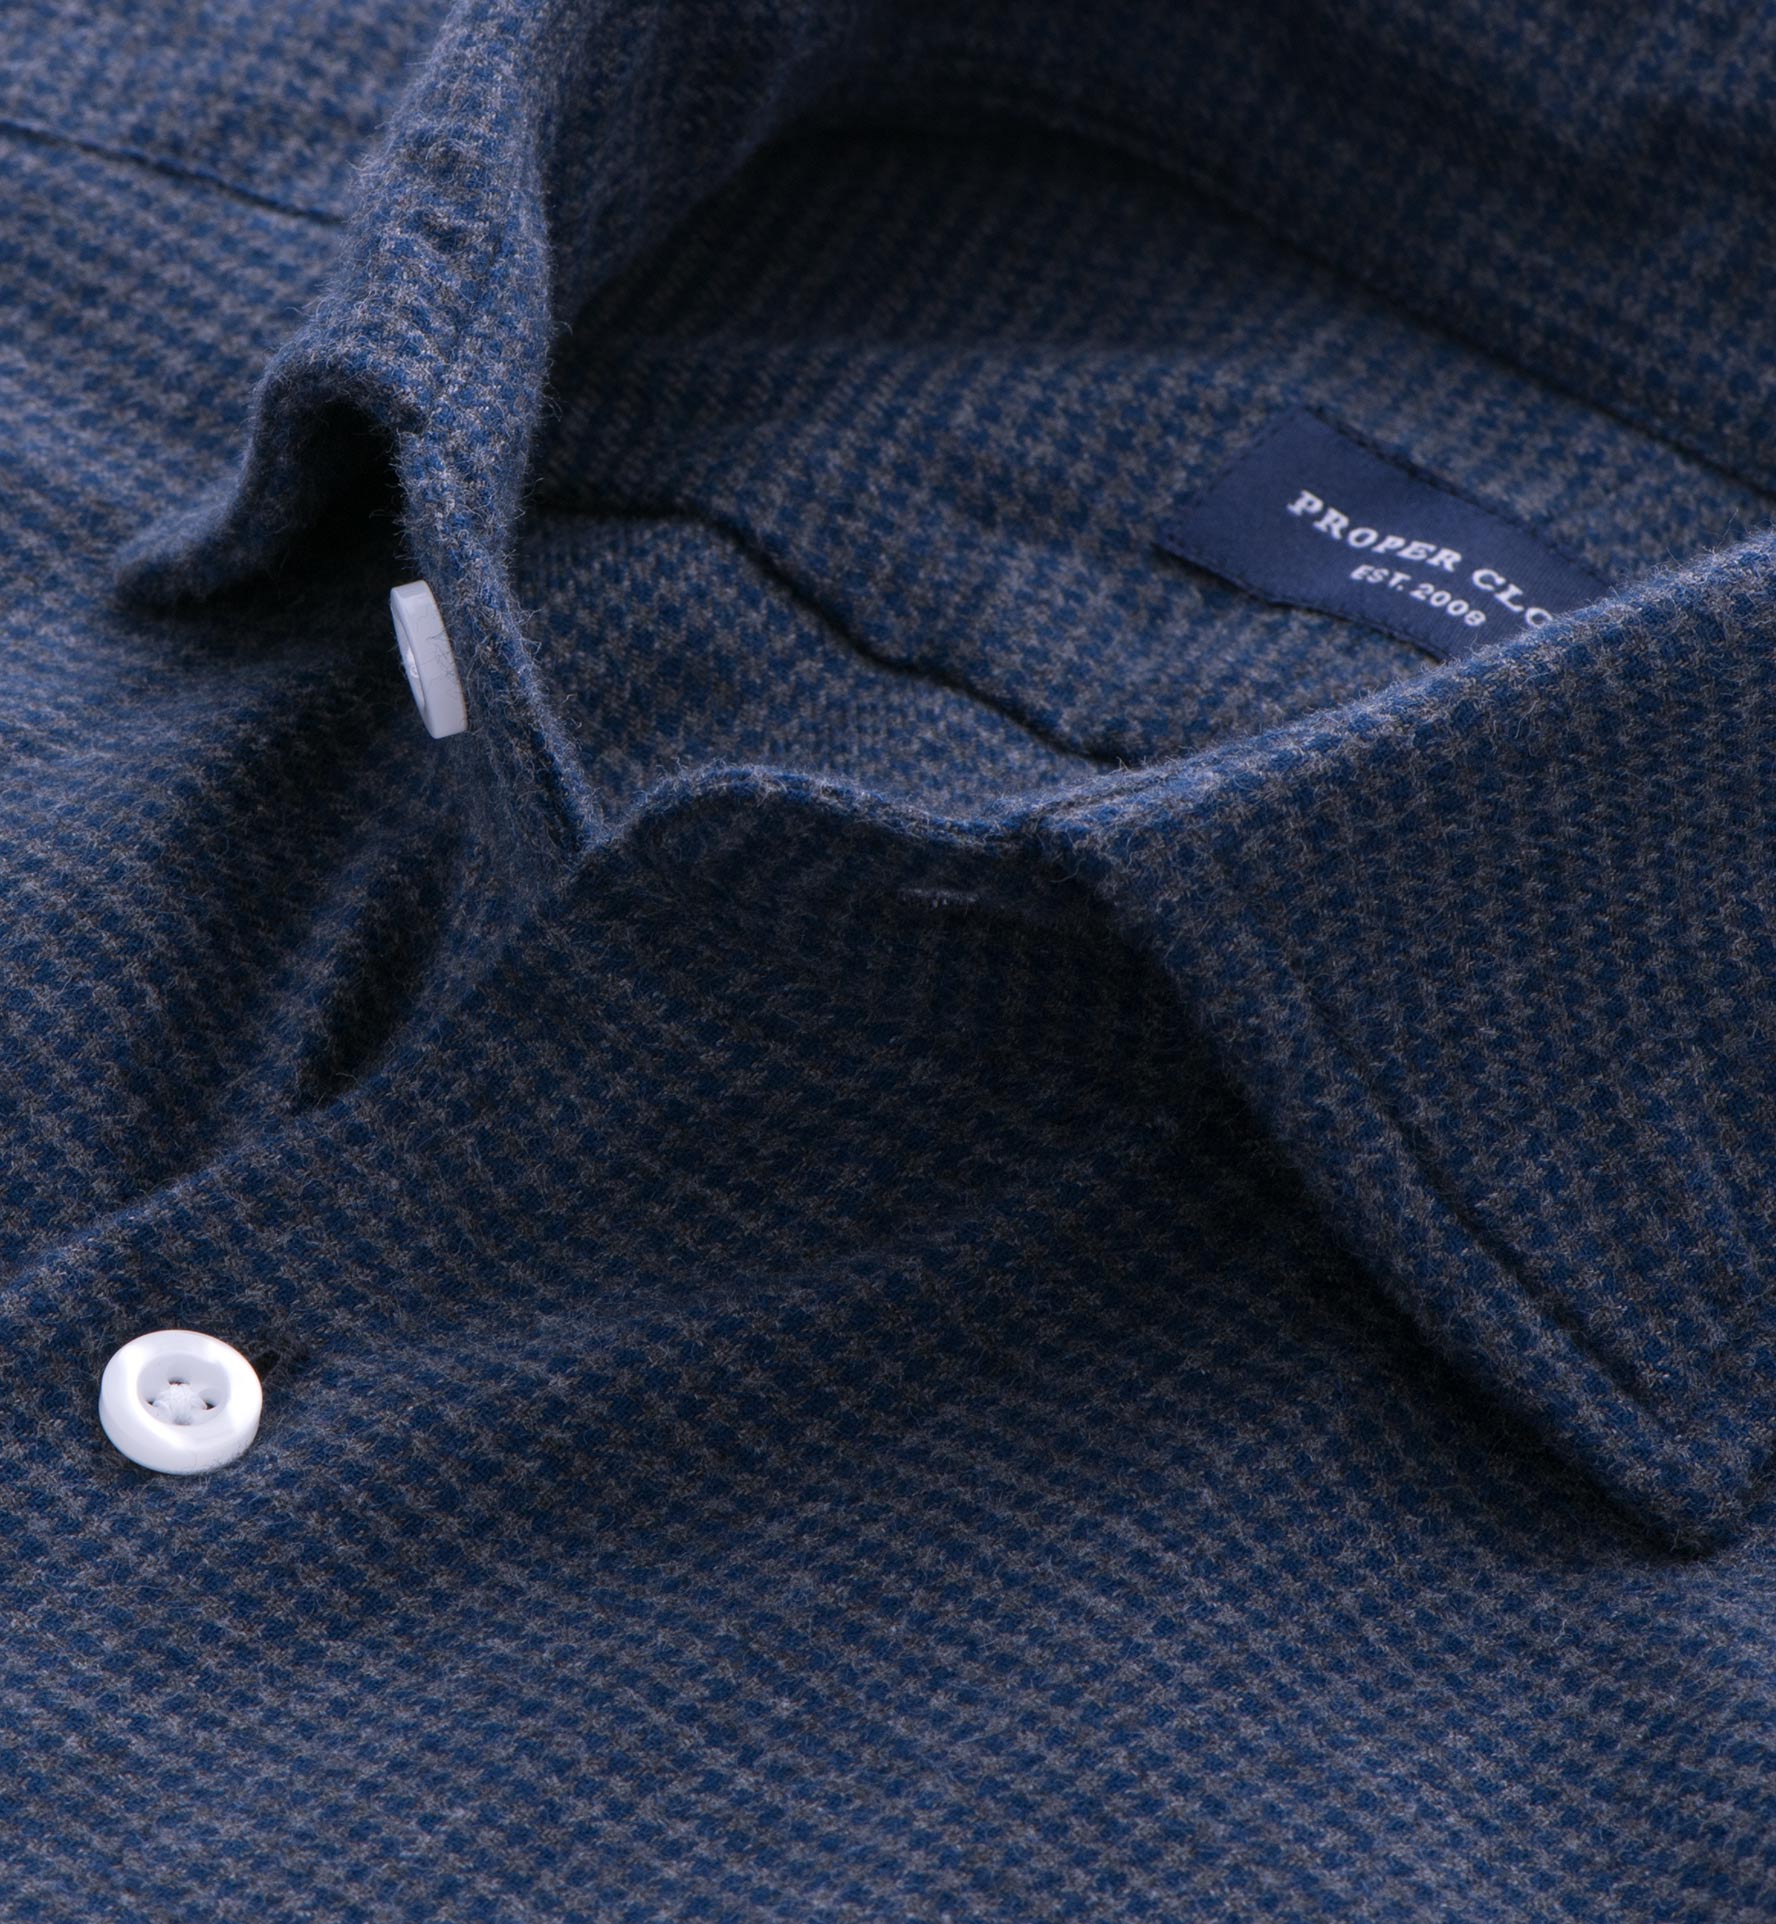 Grey and Navy Houndstooth Flannel Tailor Made Shirt by Proper Cloth